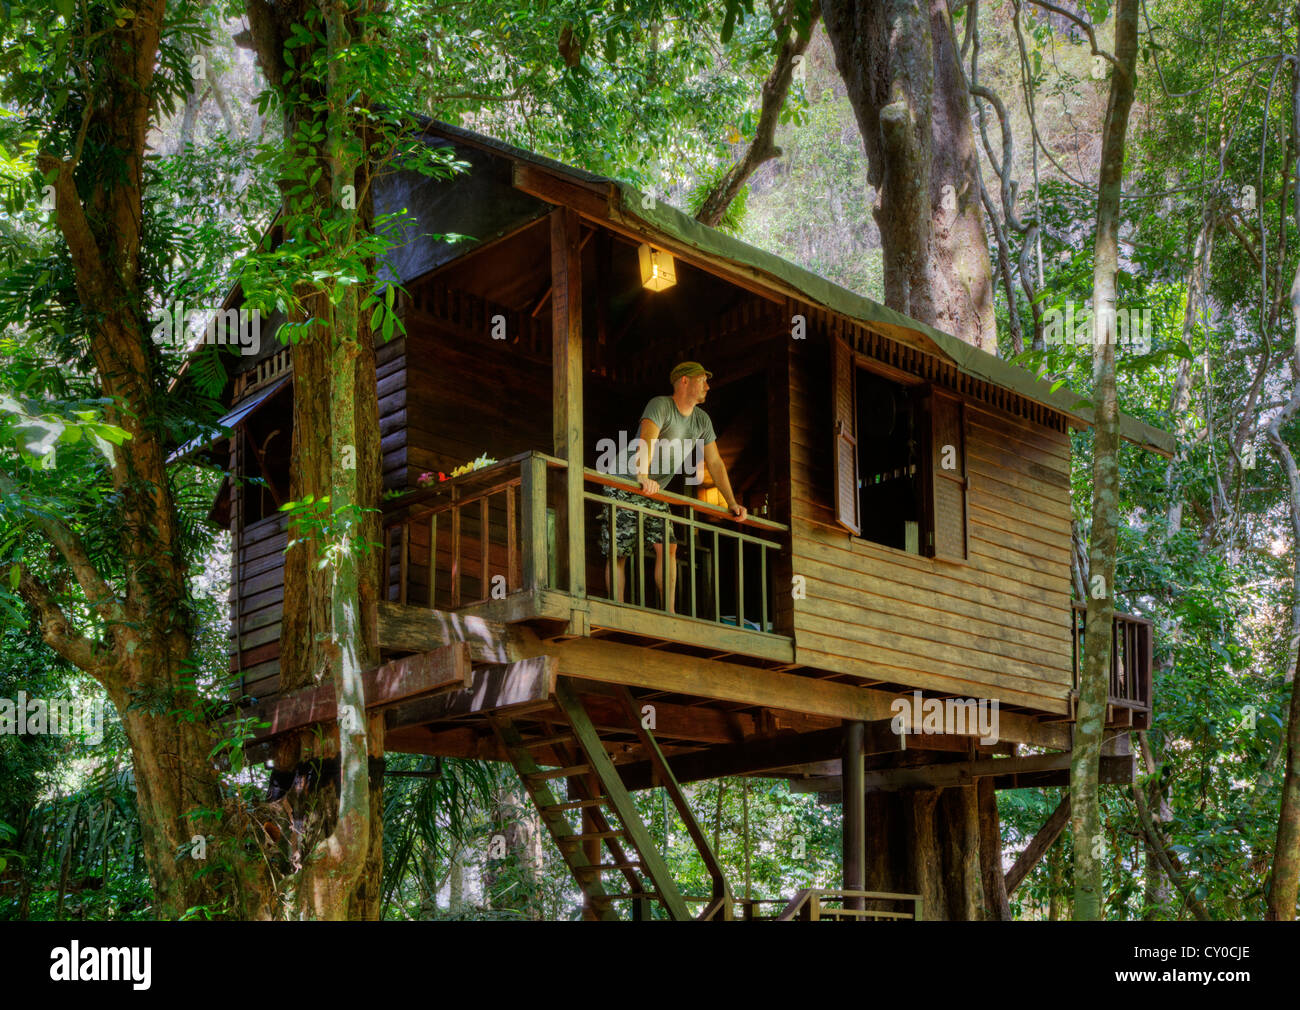 TREE HOUSES are the specialty of OUR JUNGLE HOUSE a lodge near KHAO SOK NATIONAL PARK - SURATHANI PROVENCE, THAILAND MR Stock Photo